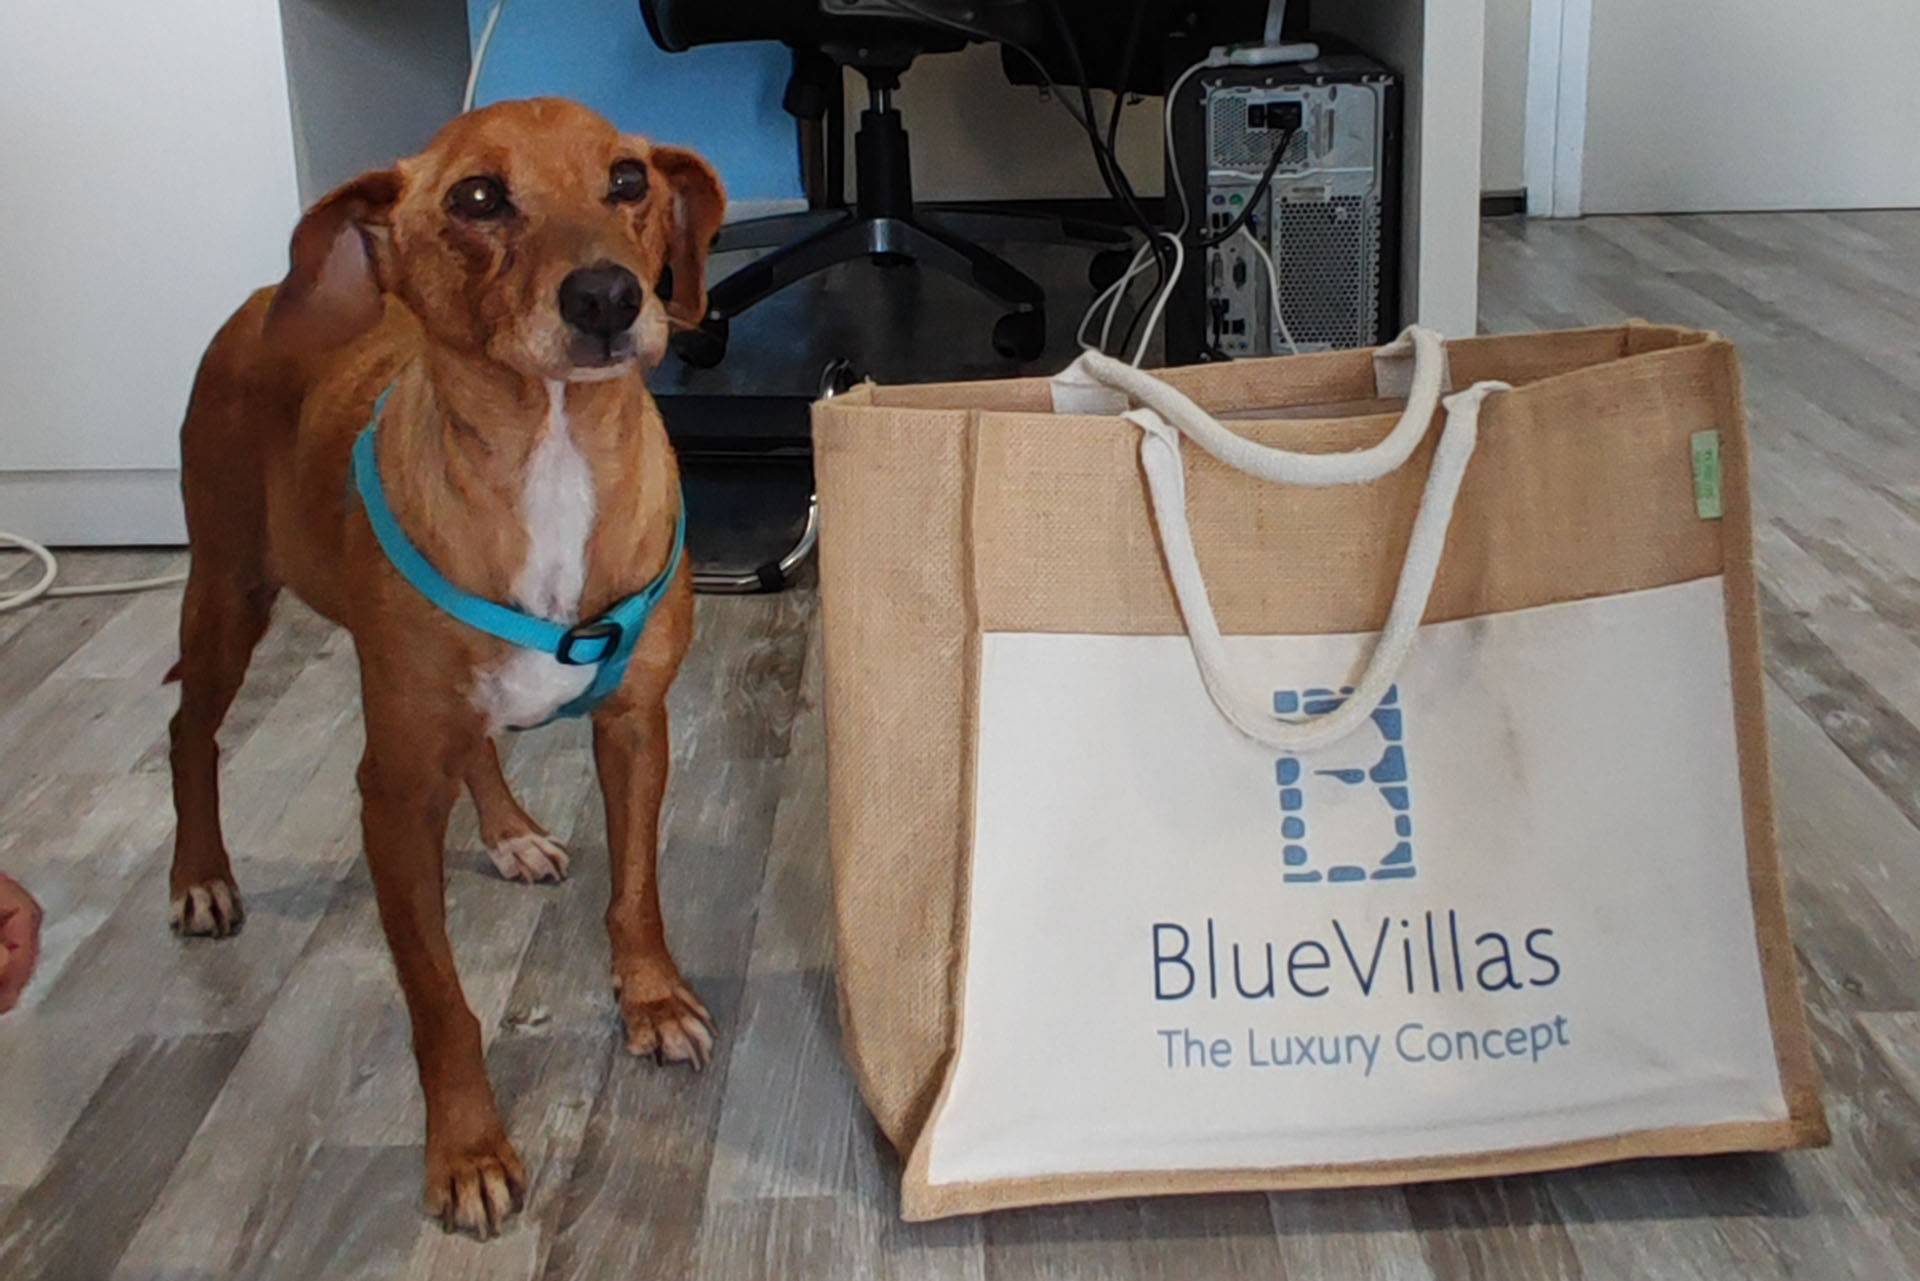 BlueVillas has expanded by… 4 paws!